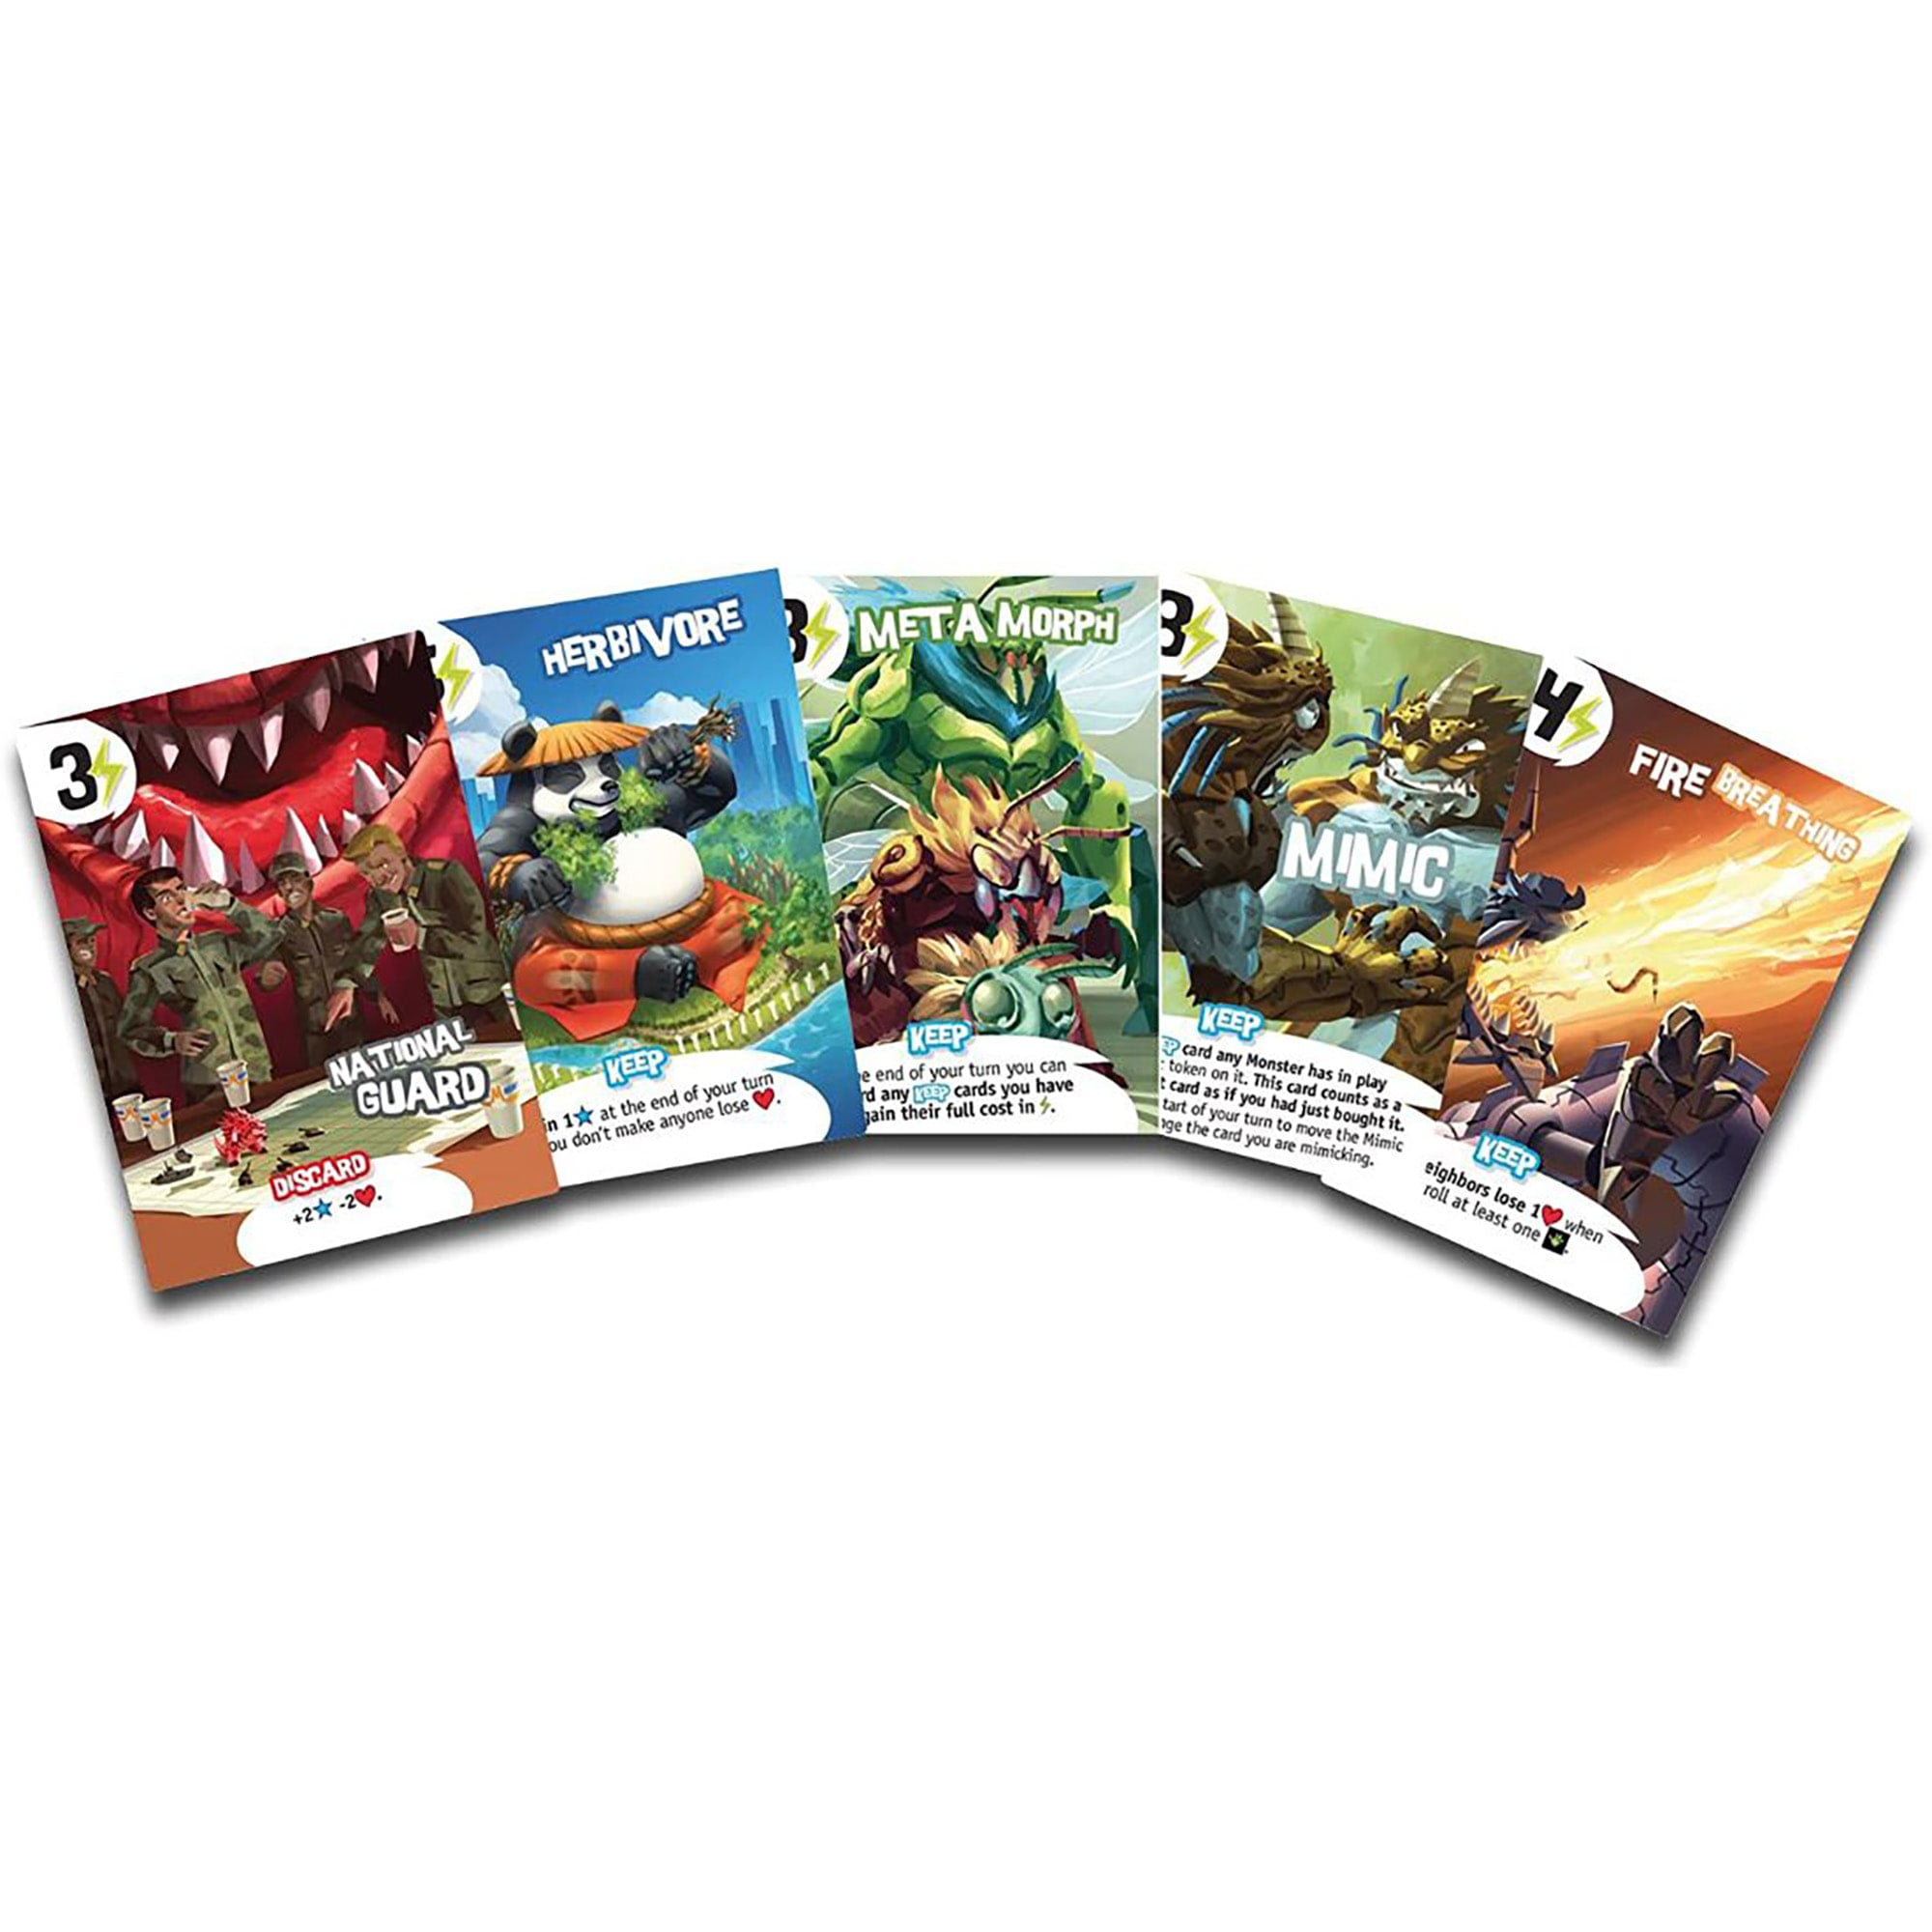 Mevrouw koud ticket King of Tokyo: New Edition - IELLO Board Game, Ages 8+, 2-6 Players, 30 Min  - Walmart.com